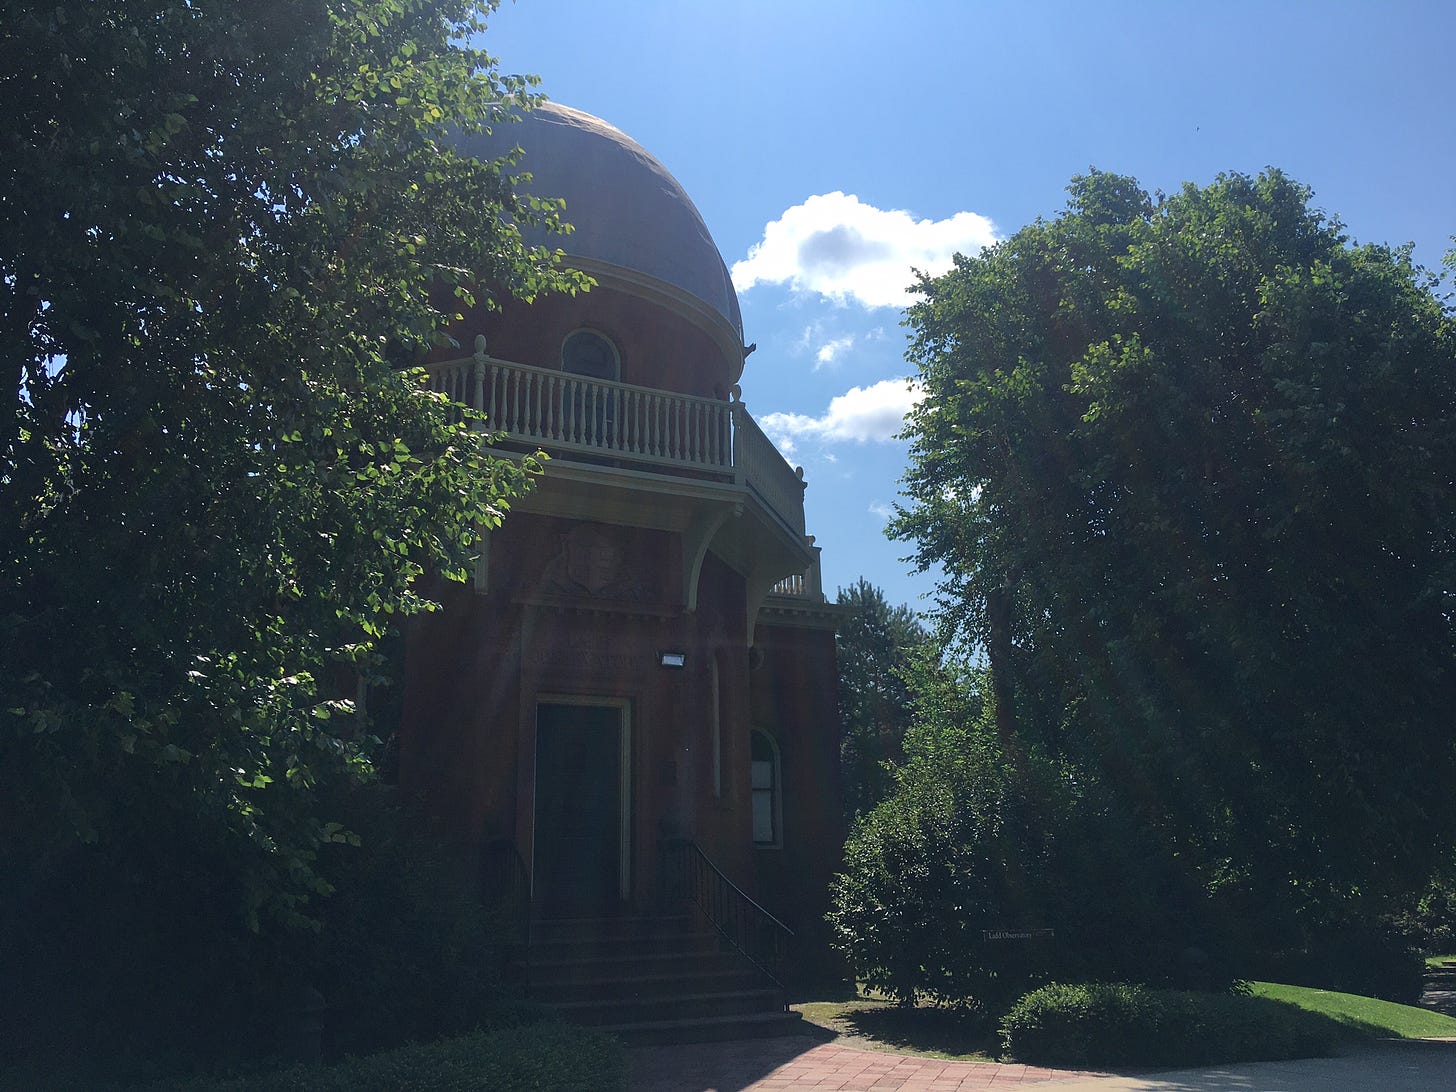 A domed brick building surrounded by trees on a sunny day